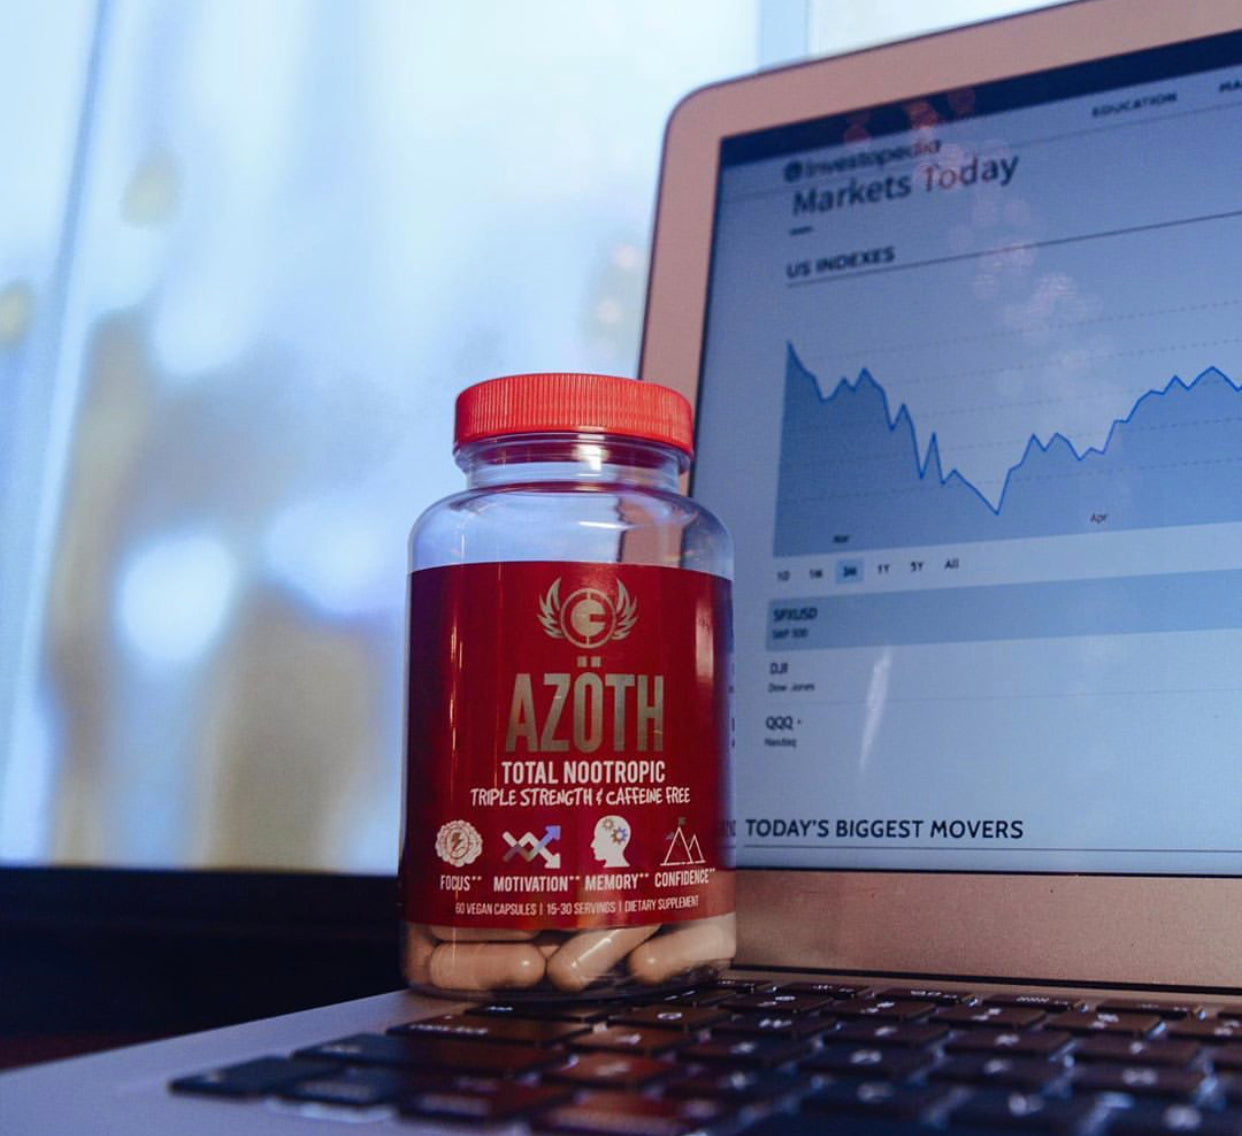 Azoth Total Nootropic - Product Overview